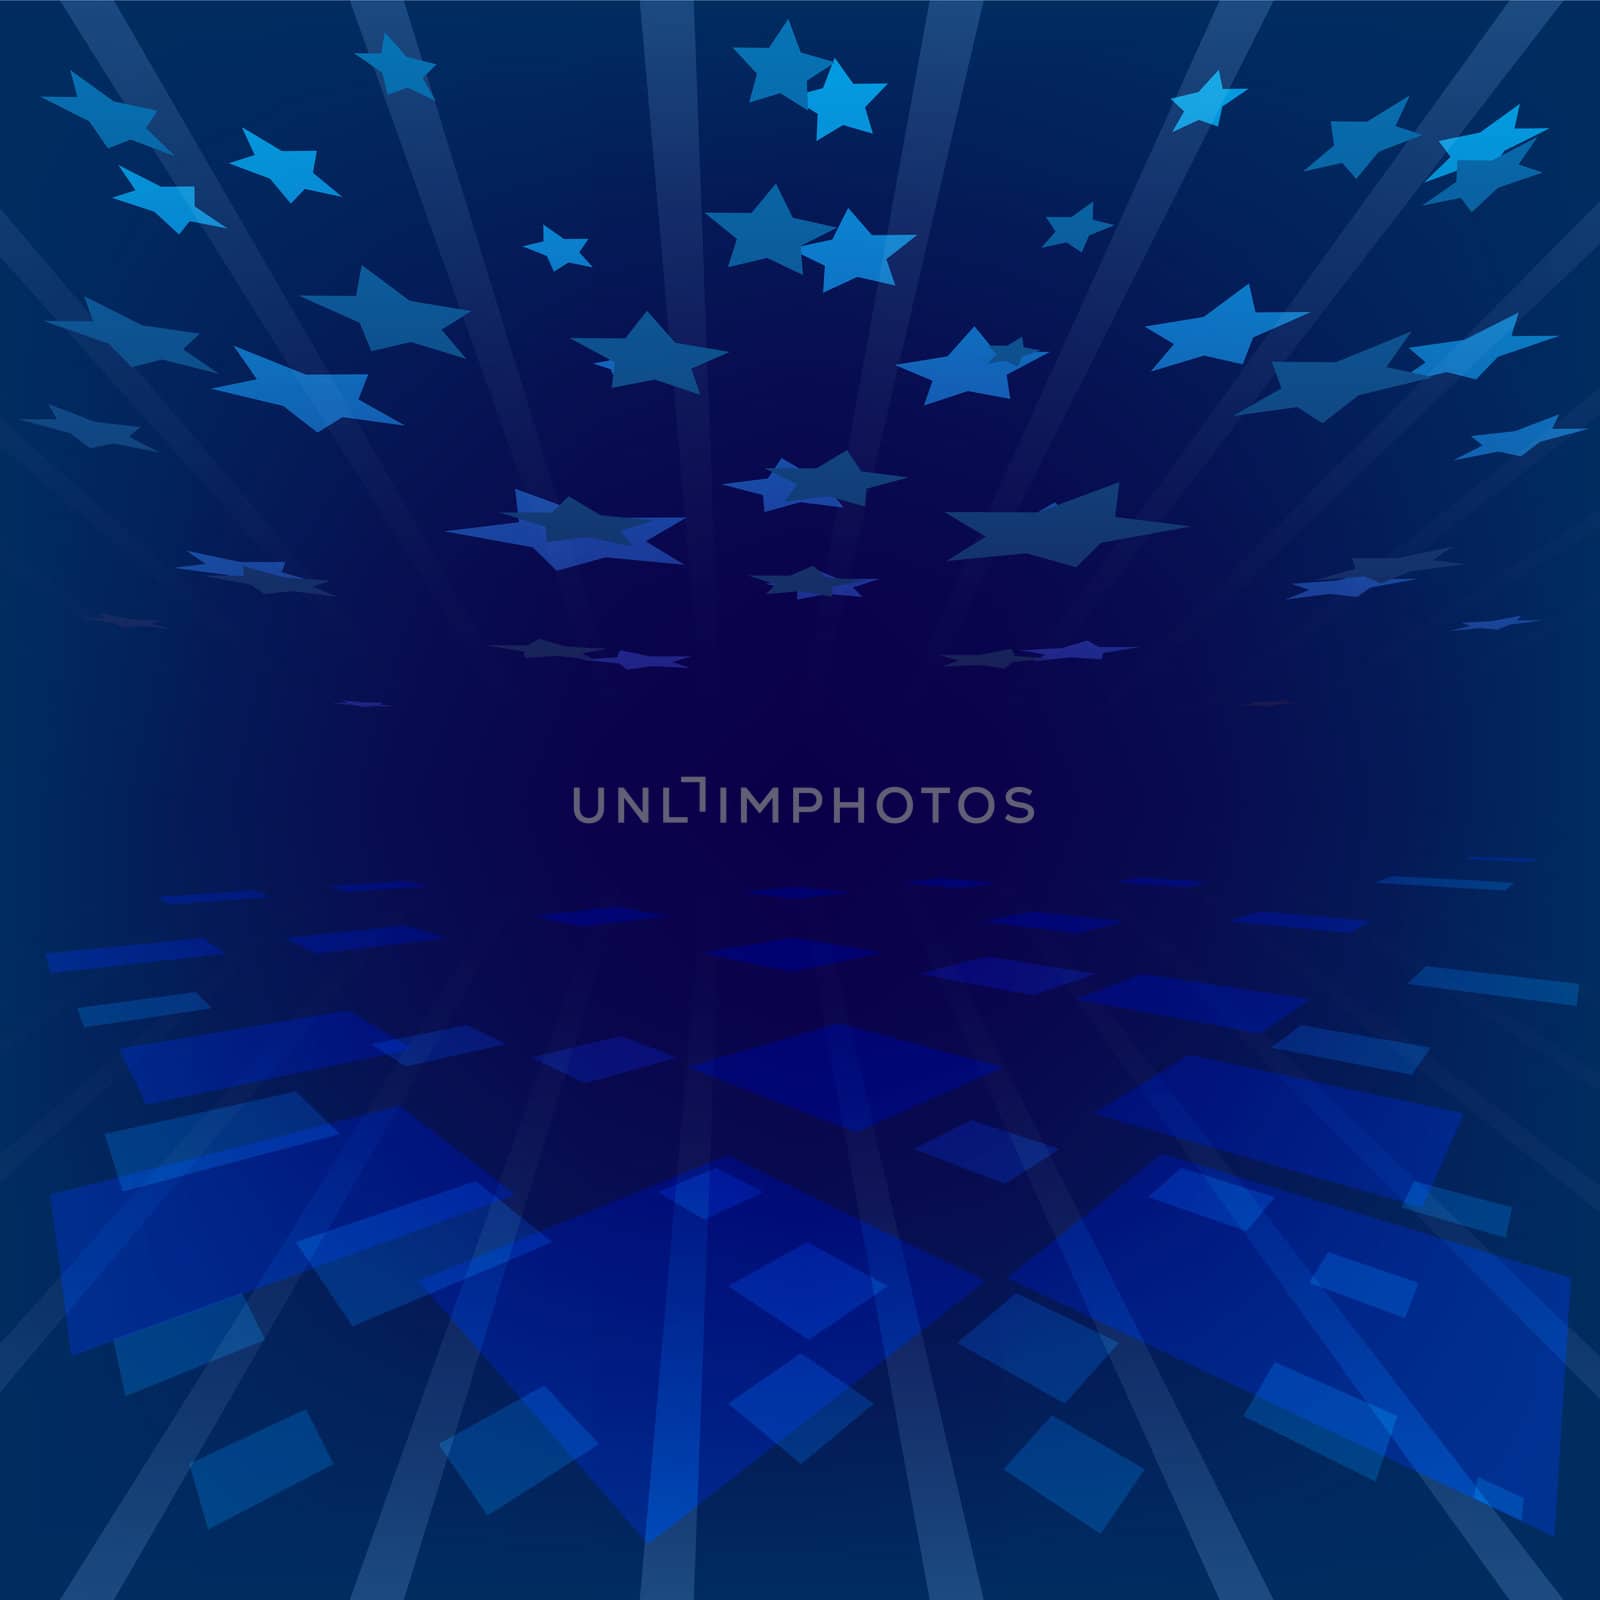 abstract background blue stars with perspective effect